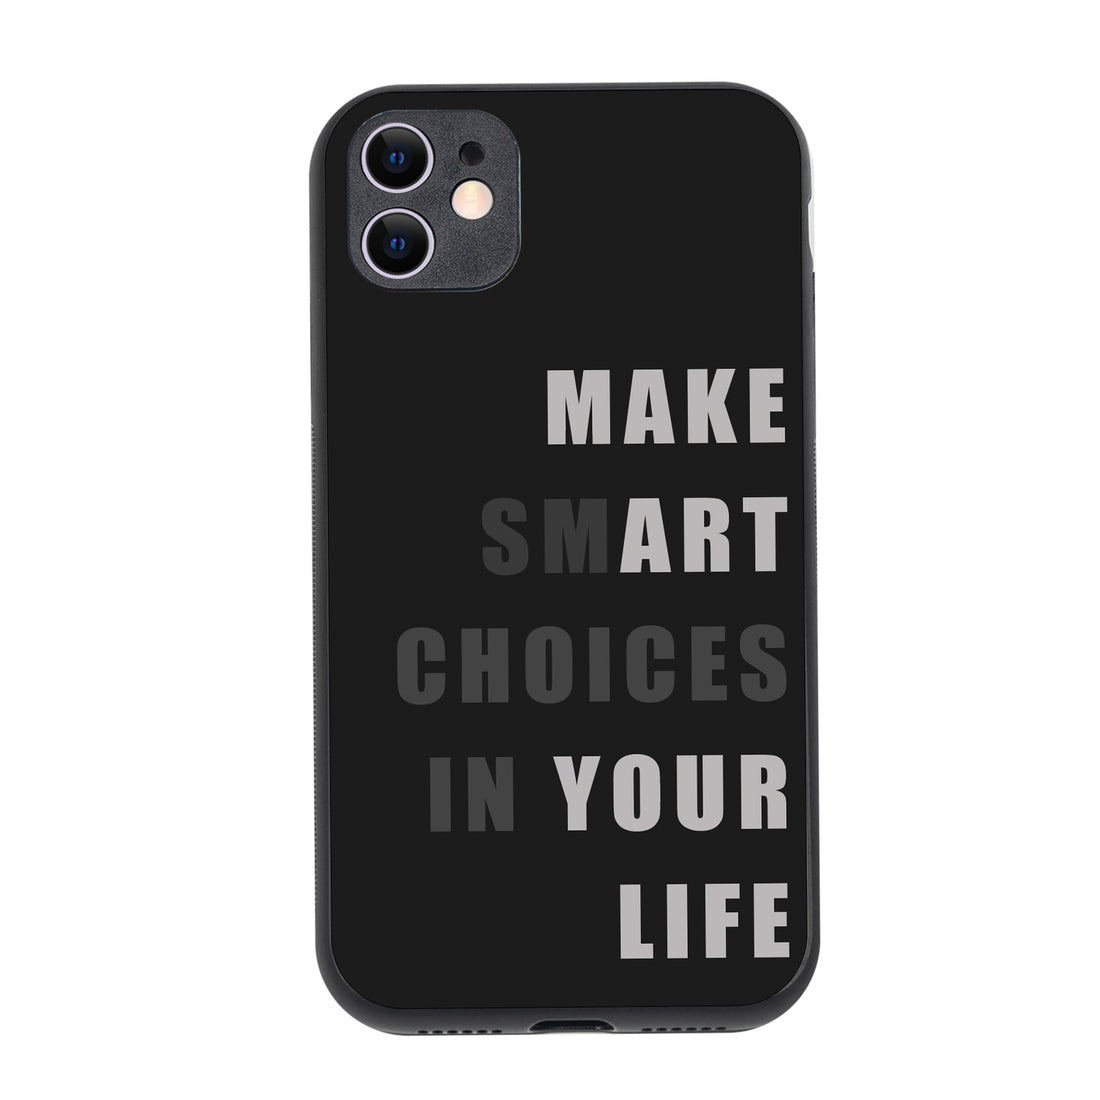 Smart Choices Motivational Quotes iPhone 11 Case